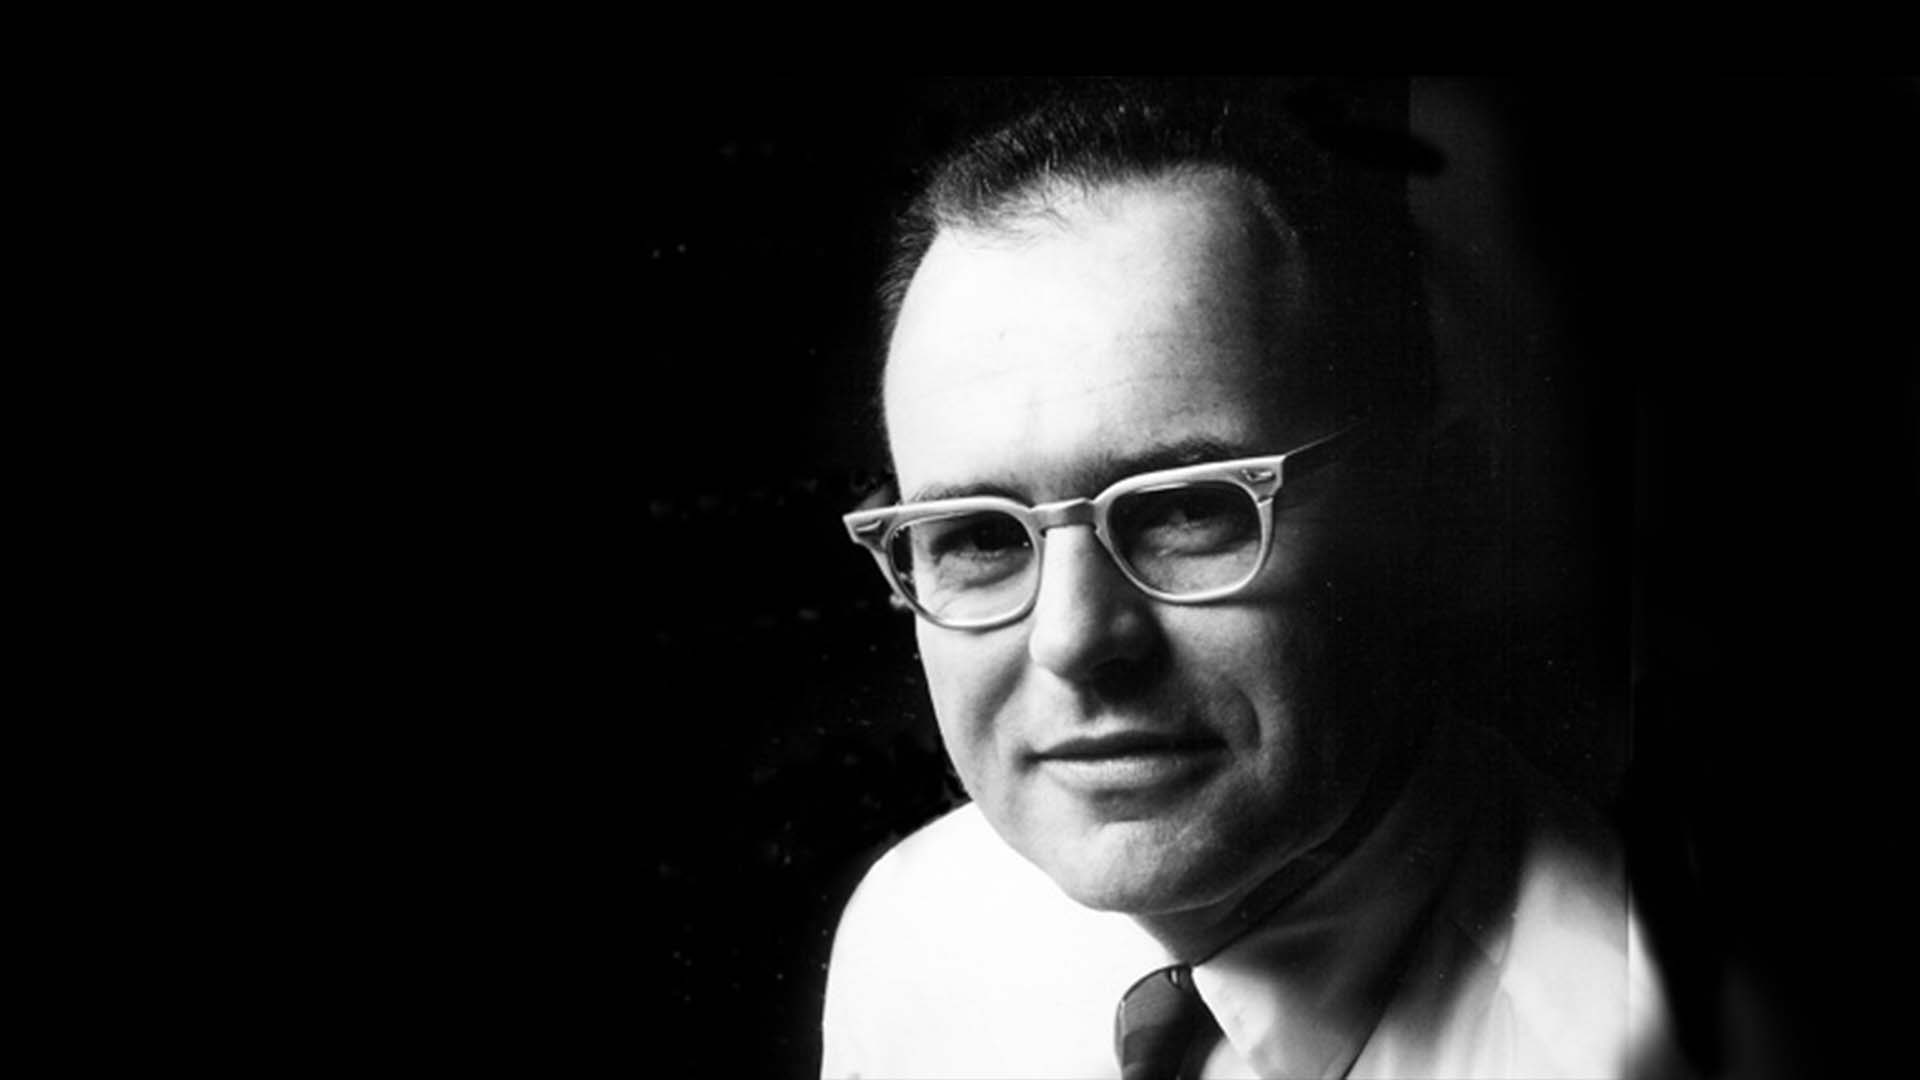 Gordon Moore (94), the creator of the law ASML flourished upon, dies in Hawaii